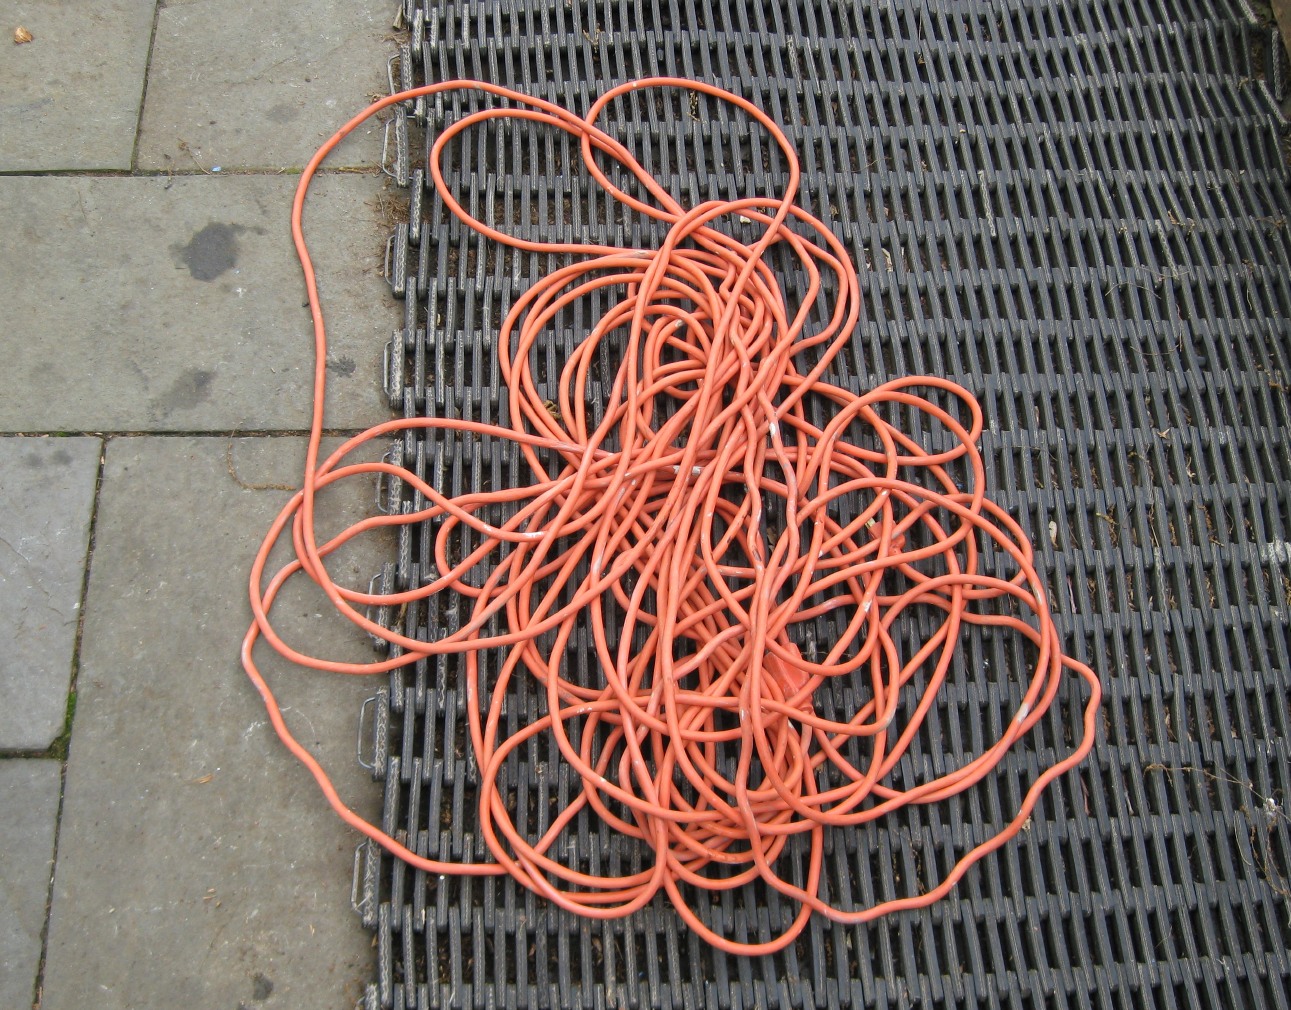 Extension Cable